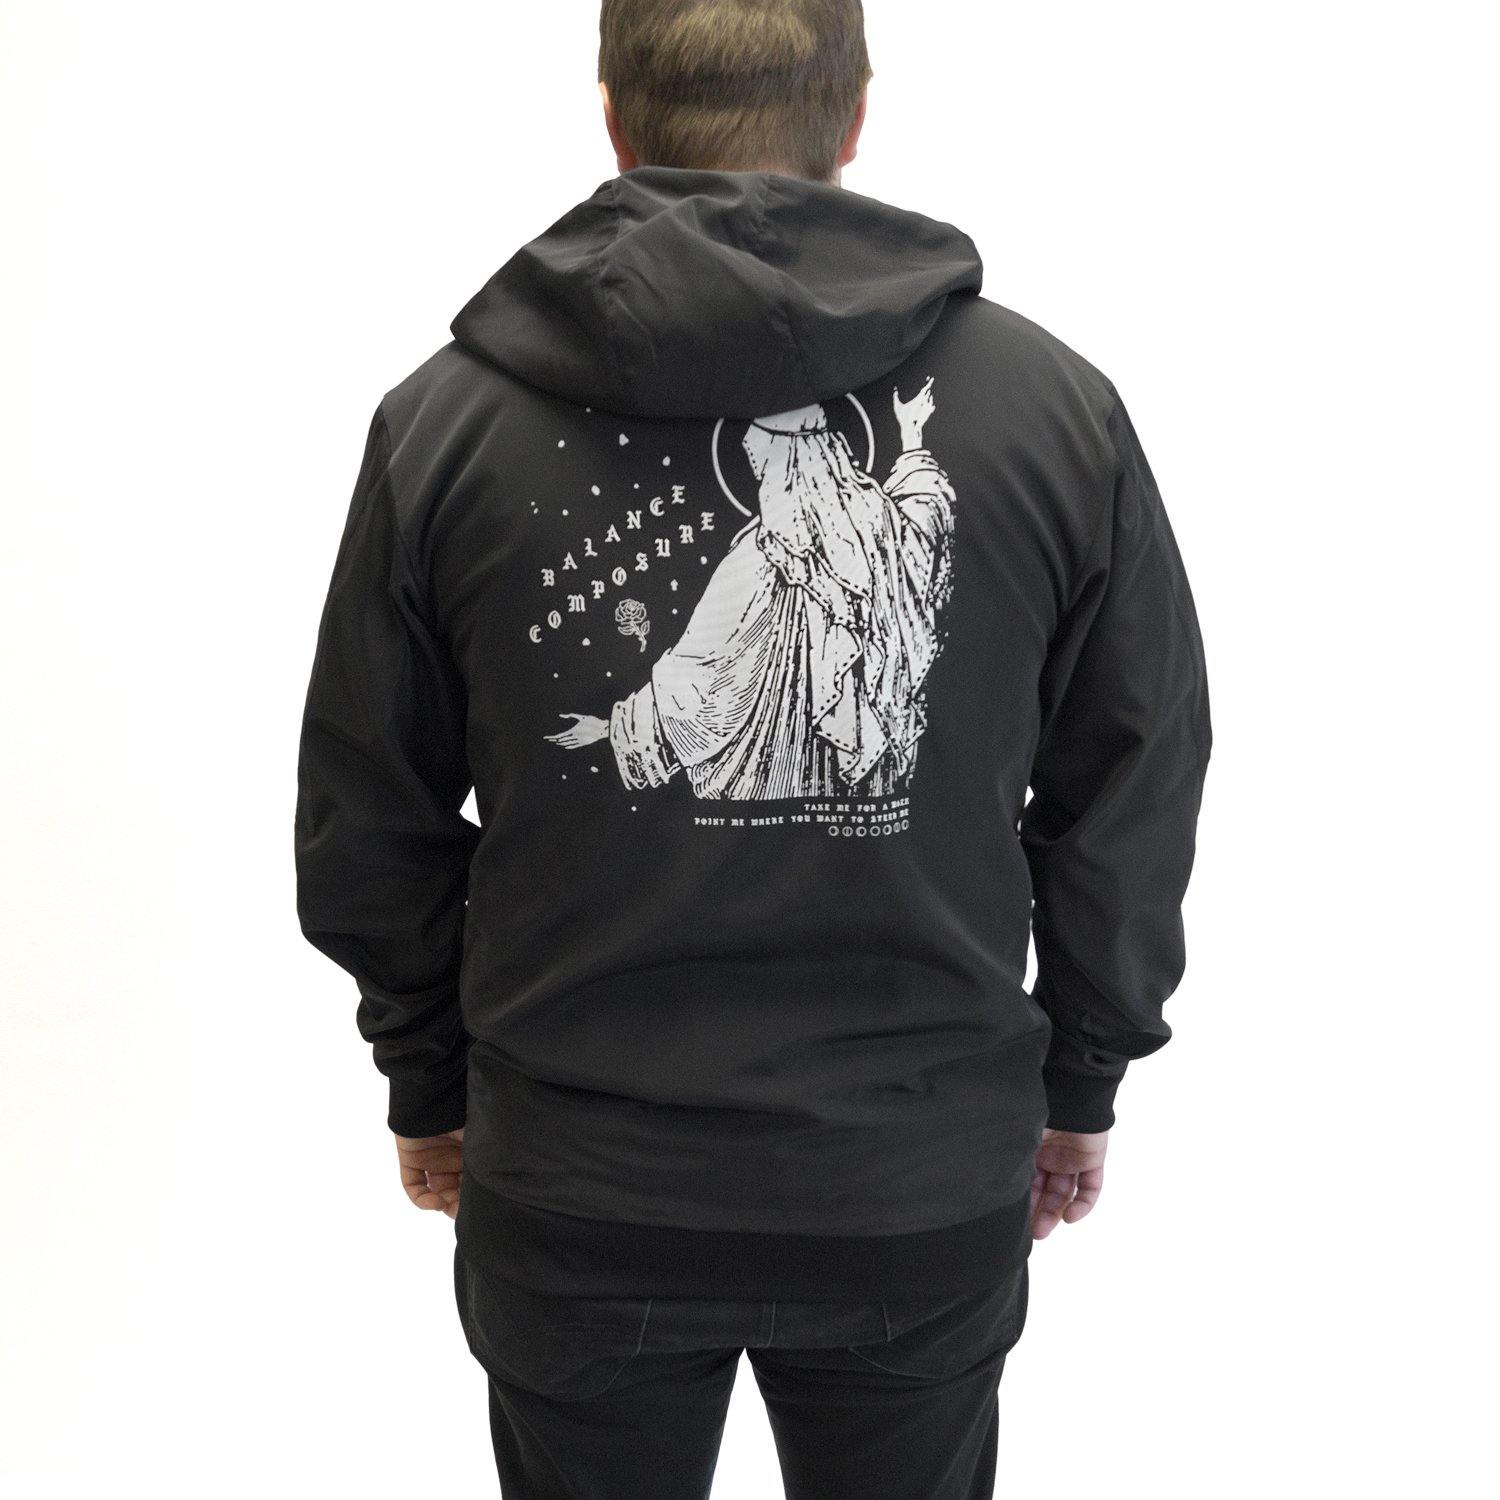 Buy – Balance and Composure "Phases" Jacket – Band & Music Merch – Cold Cuts Merch